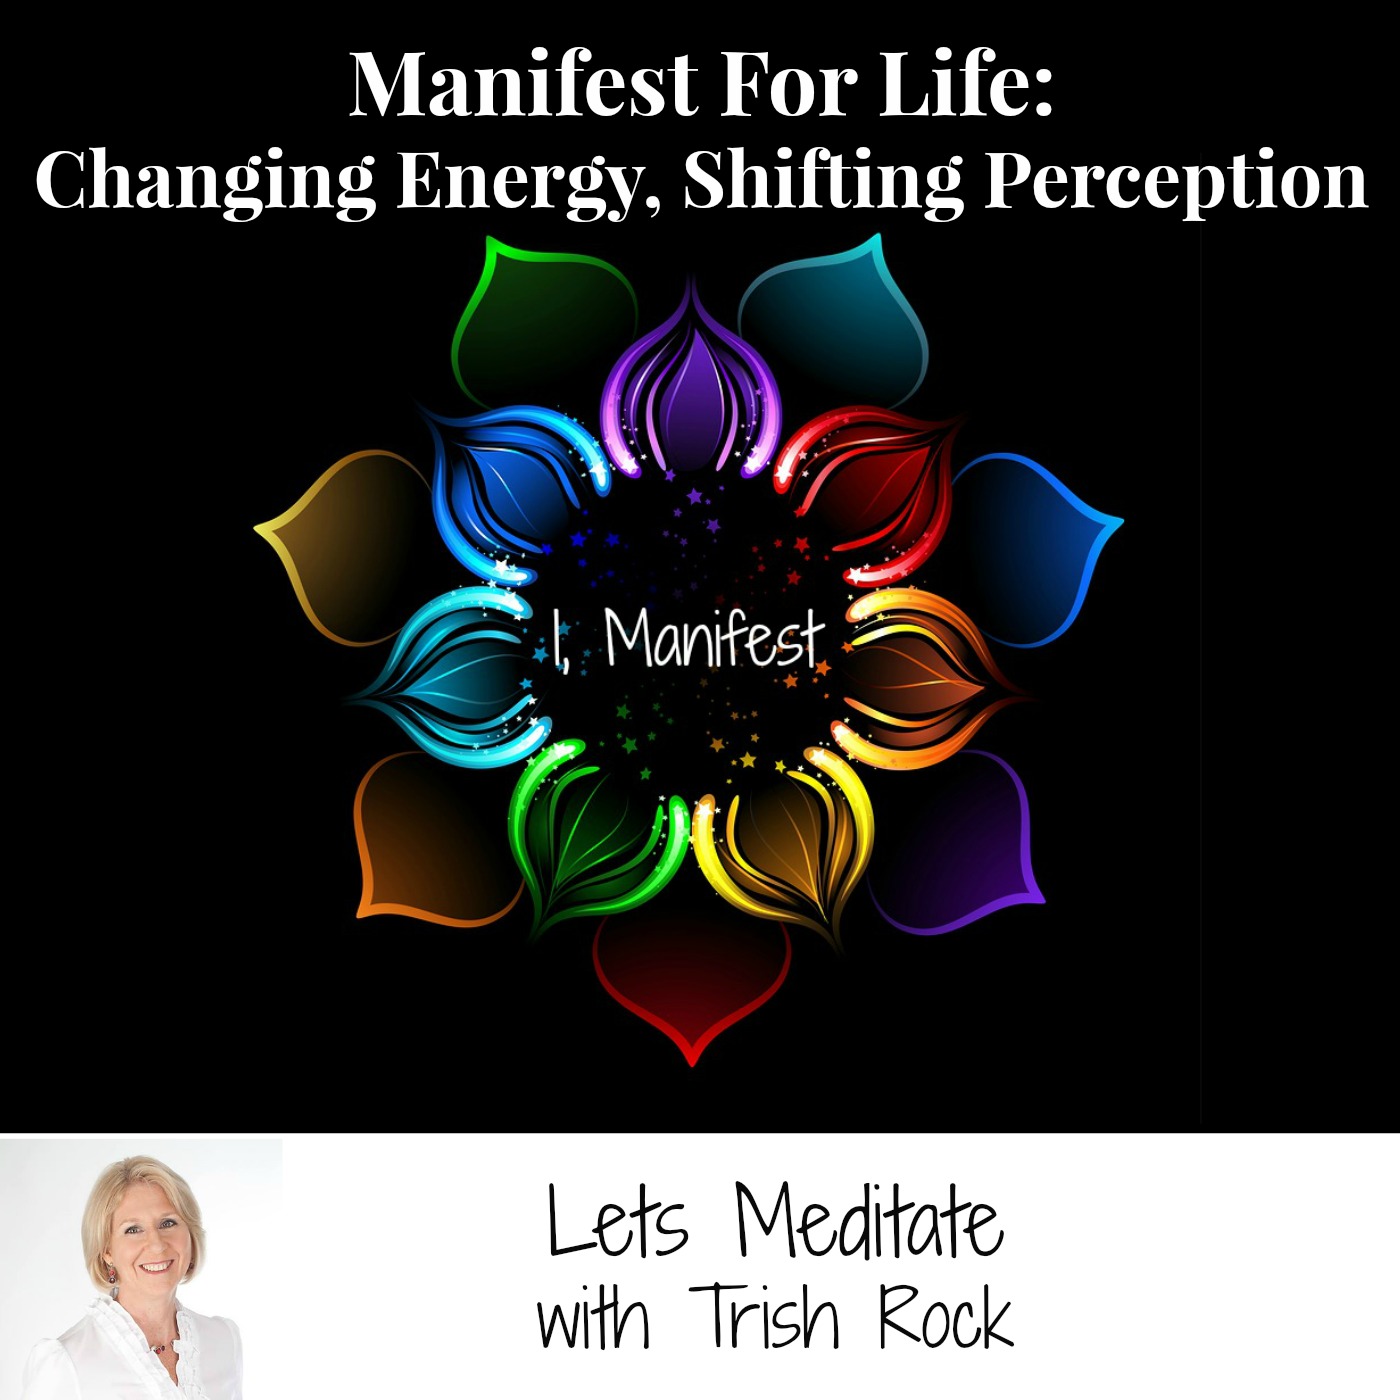 Manifest For Life: Lets Meditate – Be In The Now